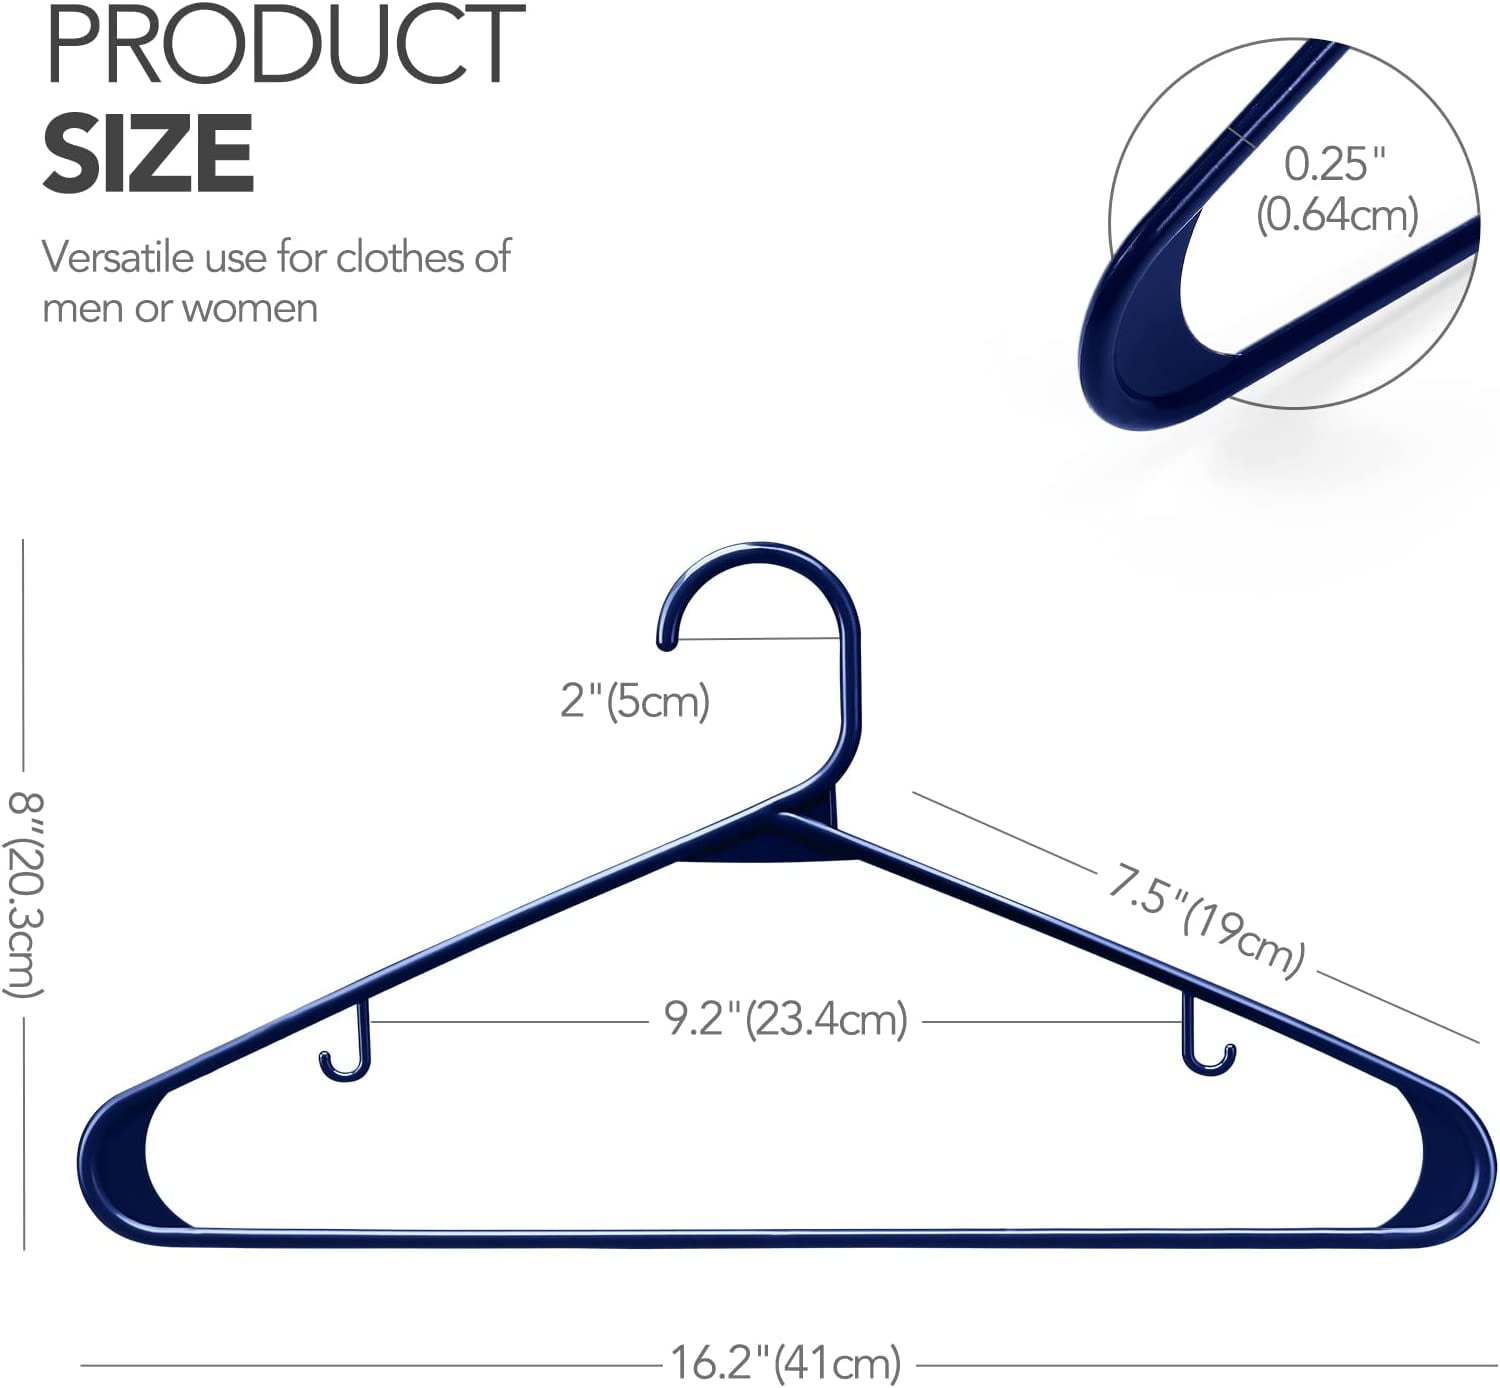 Hangorize Plastic Hangers 60-Pack, Black Plastic Hangers - Standard-Size Clothes Hanger with Notches - Hangers for Clothing and Accessories - Closet